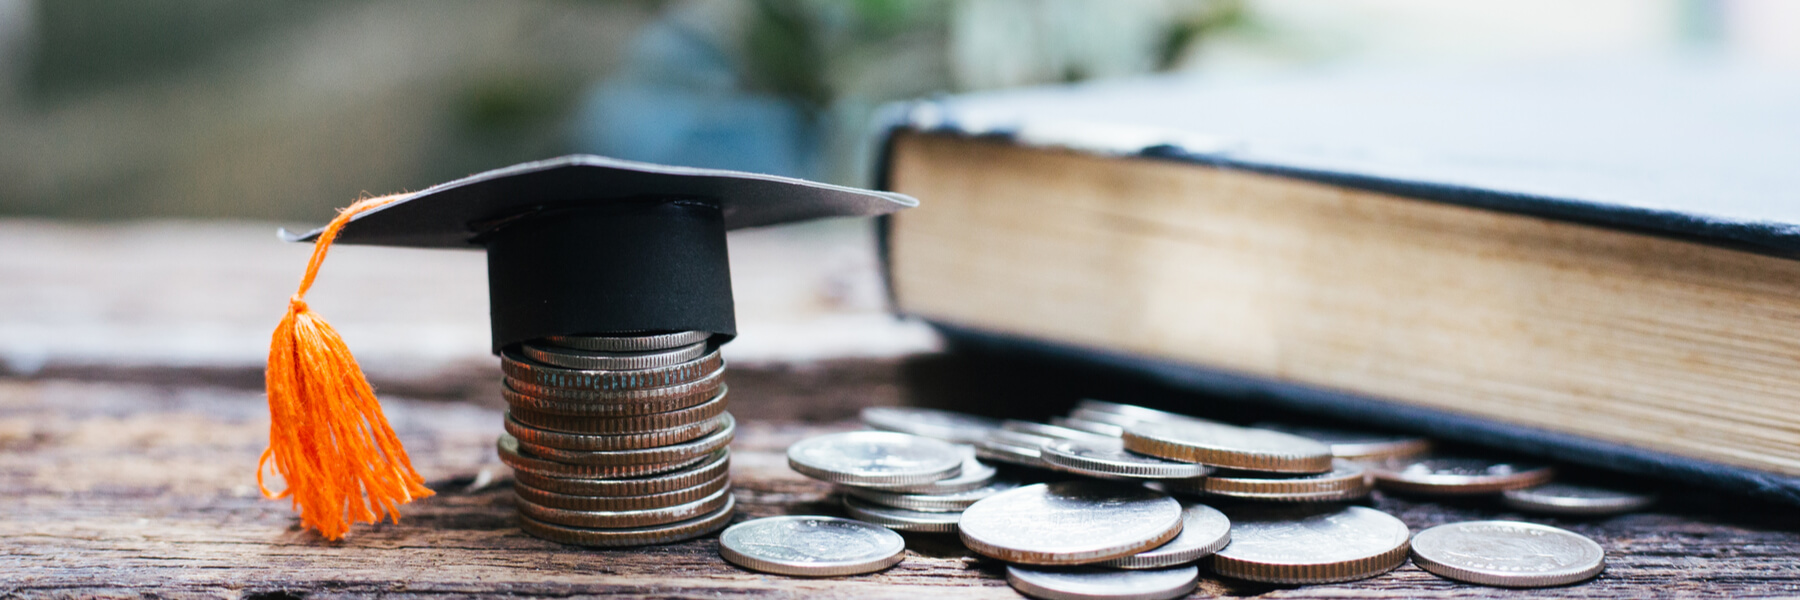 Scholarship concept, cap on top of the money with book